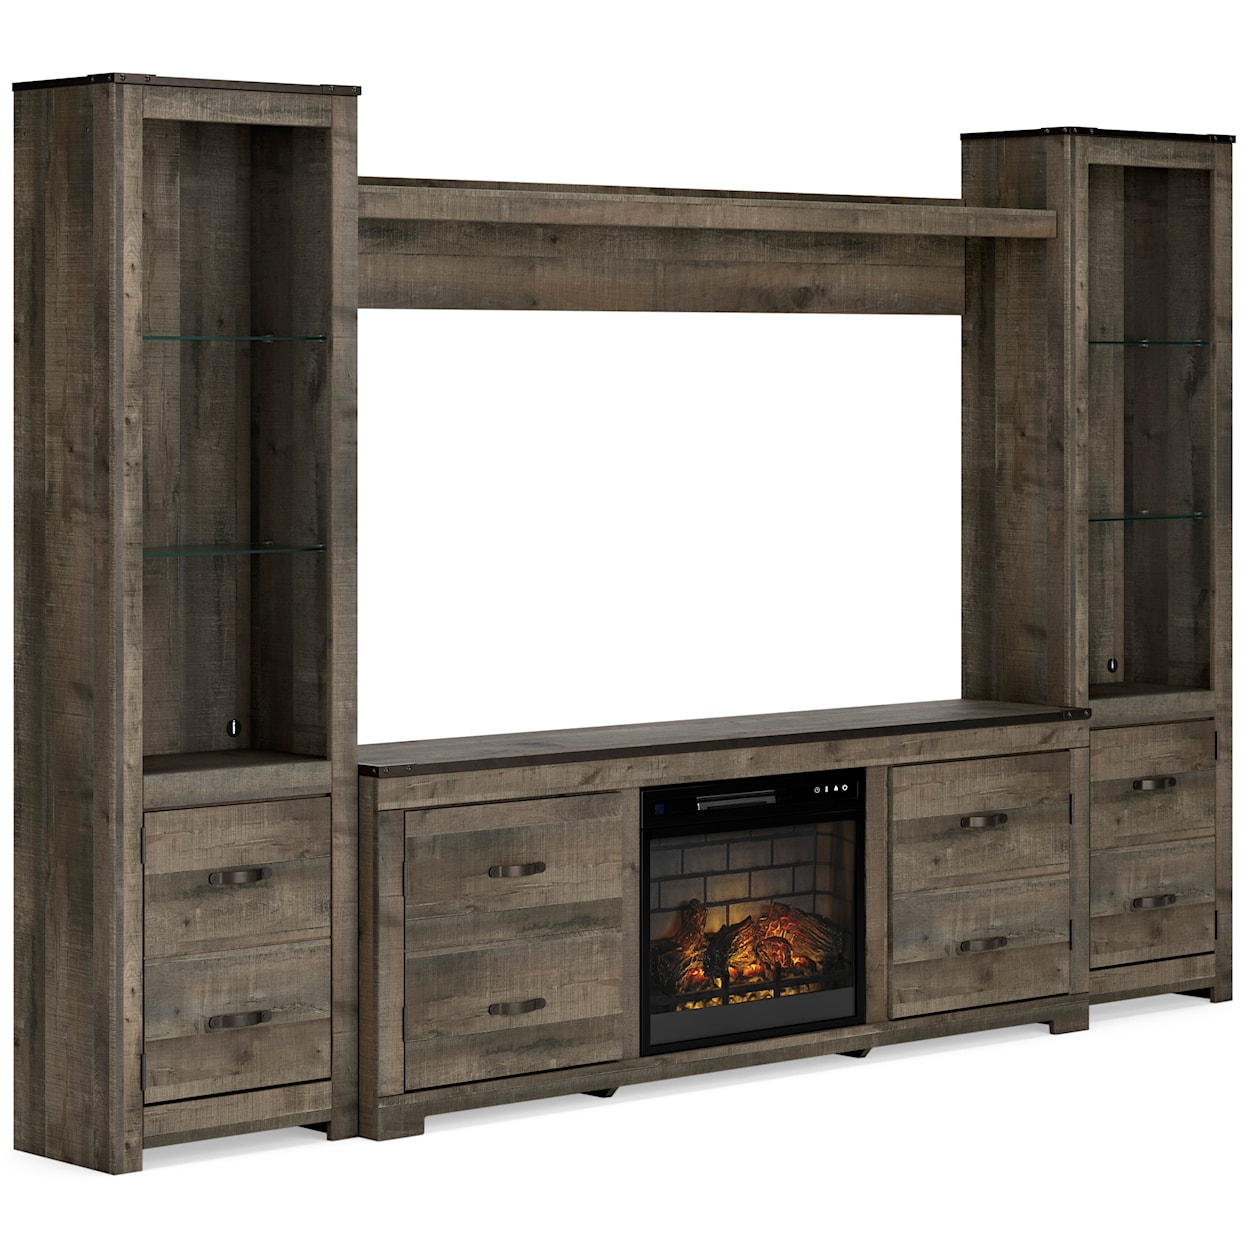 Signature Design by Ashley Furniture Trinell Entertainment Center with Fireplace